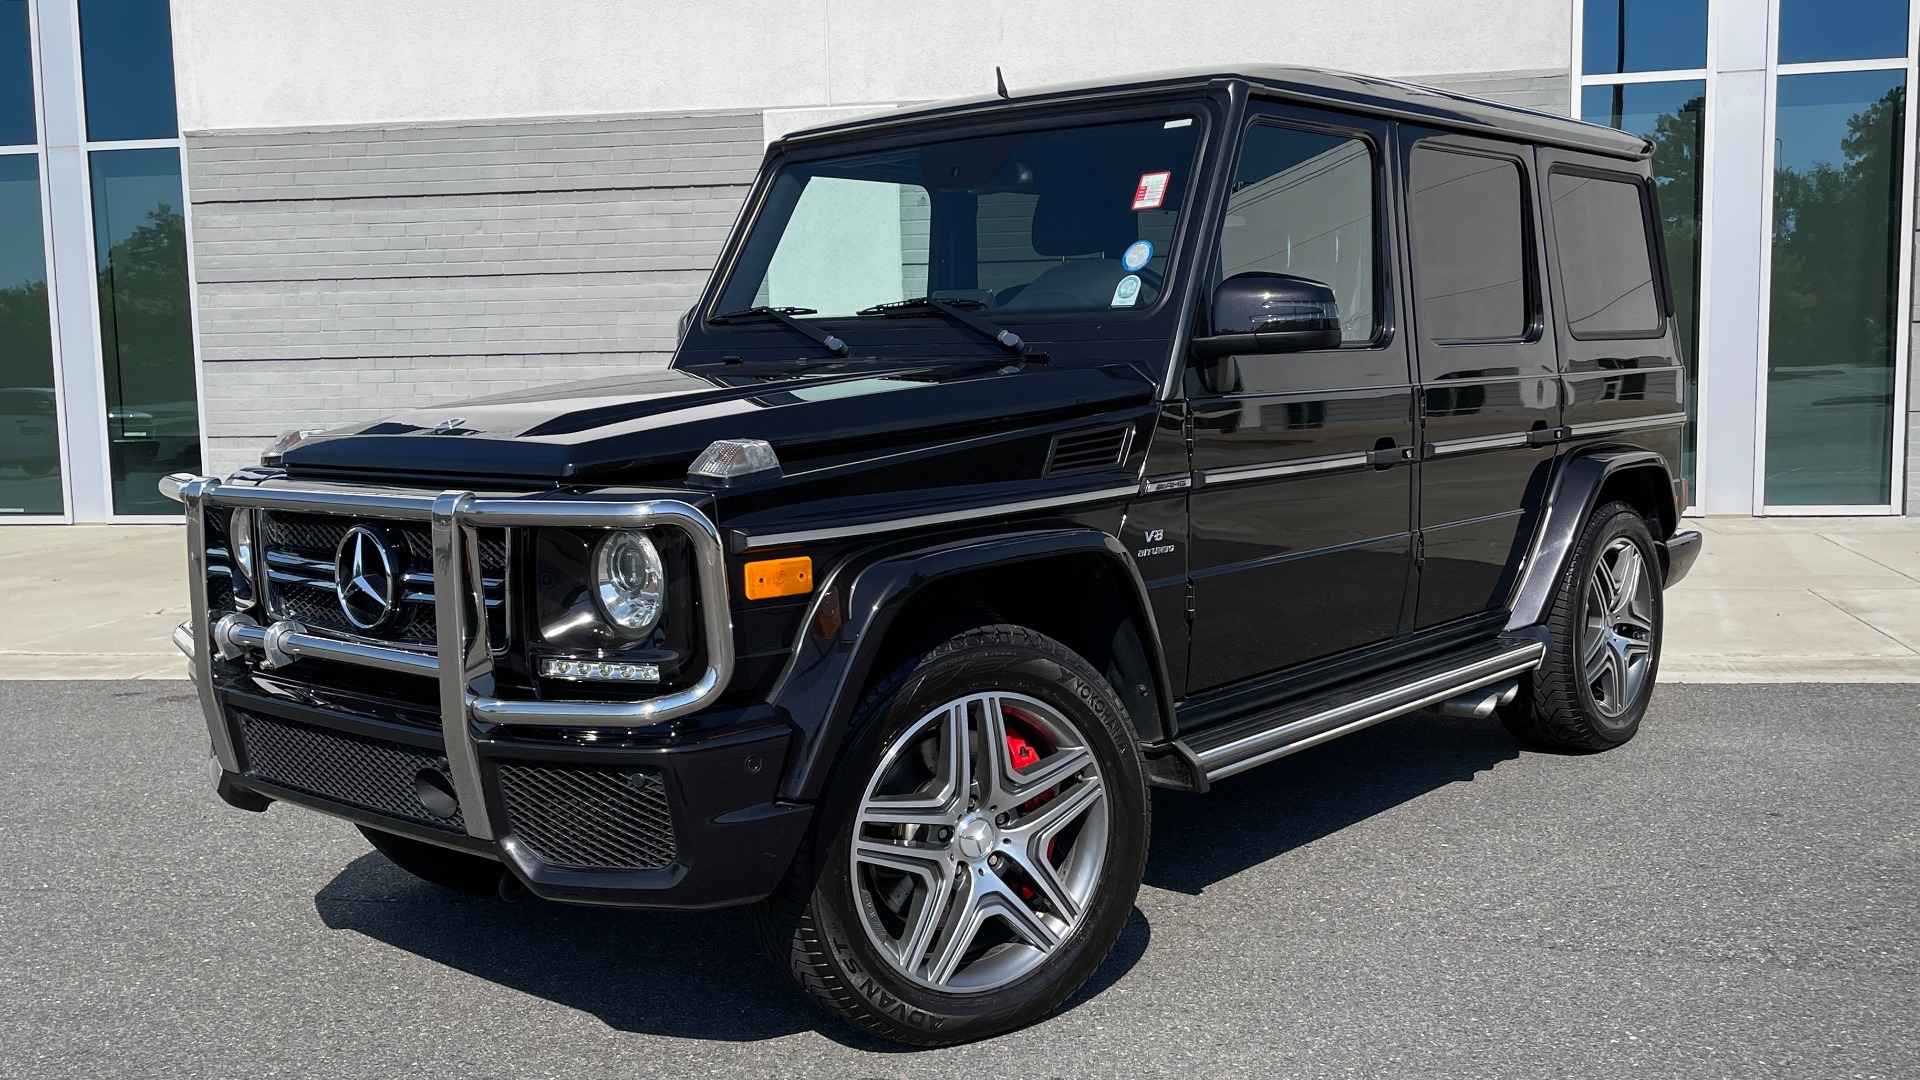 Used 2014 Mercedes-Benz G-CLASS G 63 AMG / DISGNO LEATHER / NAV / SUNROOF / REARVIEW for sale Sold at Formula Imports in Charlotte NC 28227 1